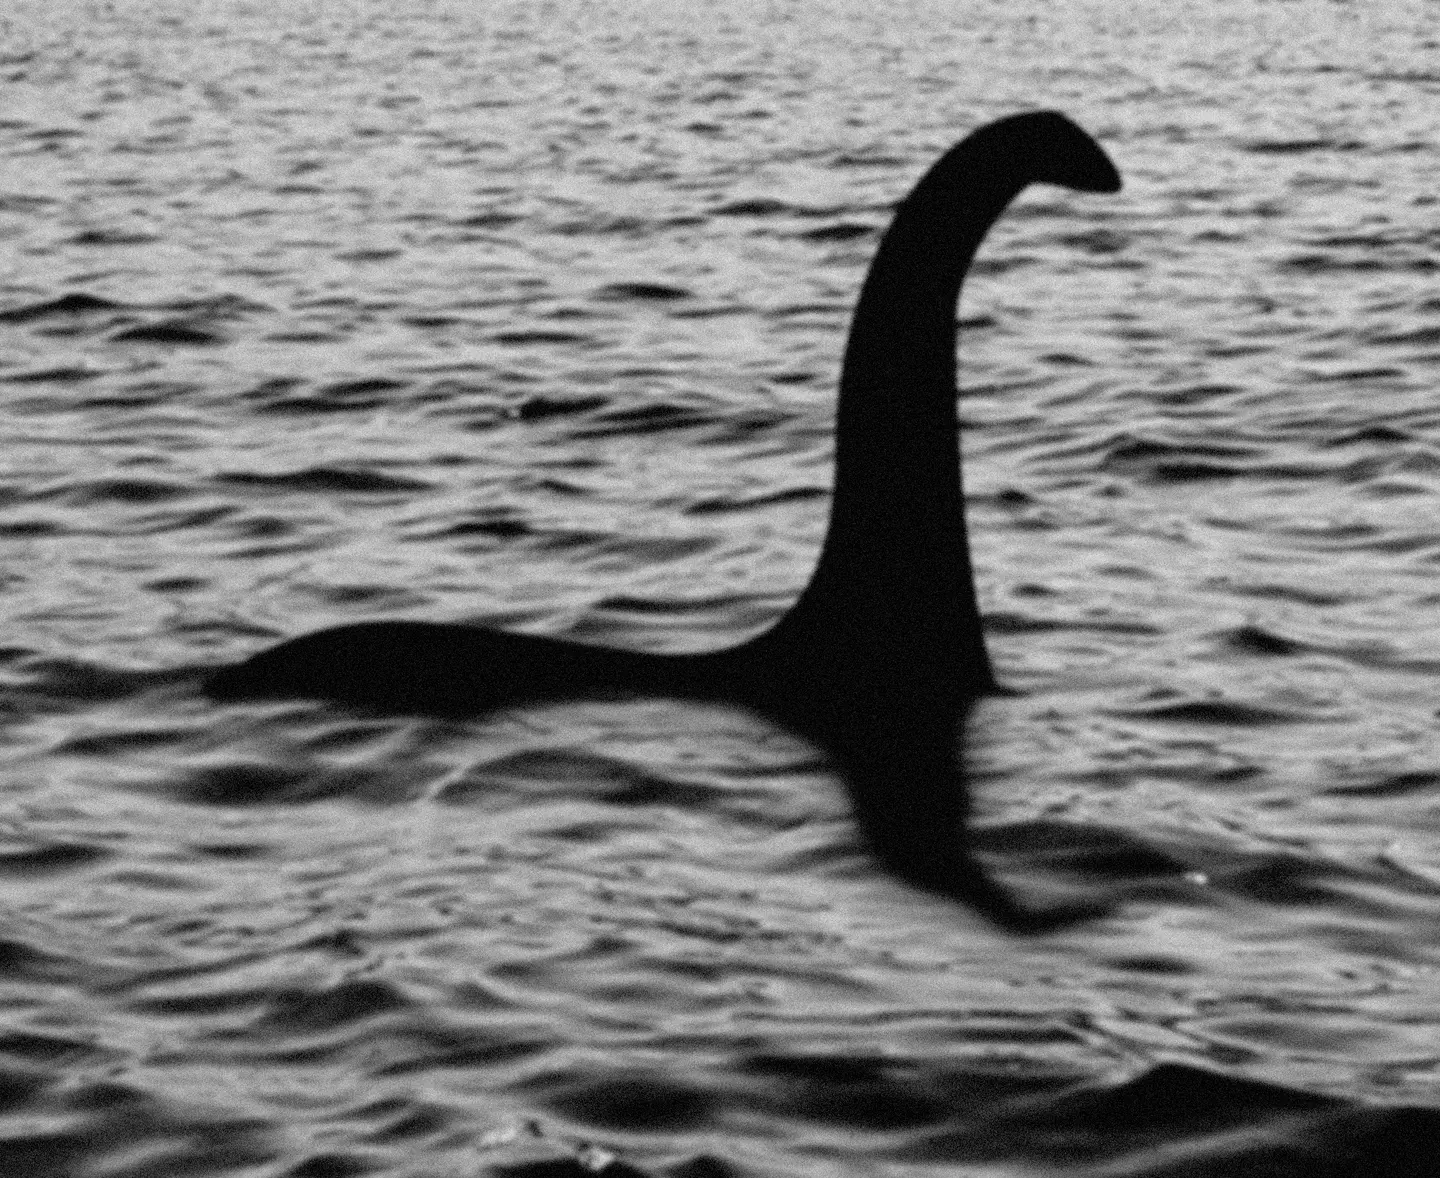 The search for Nessie continues.